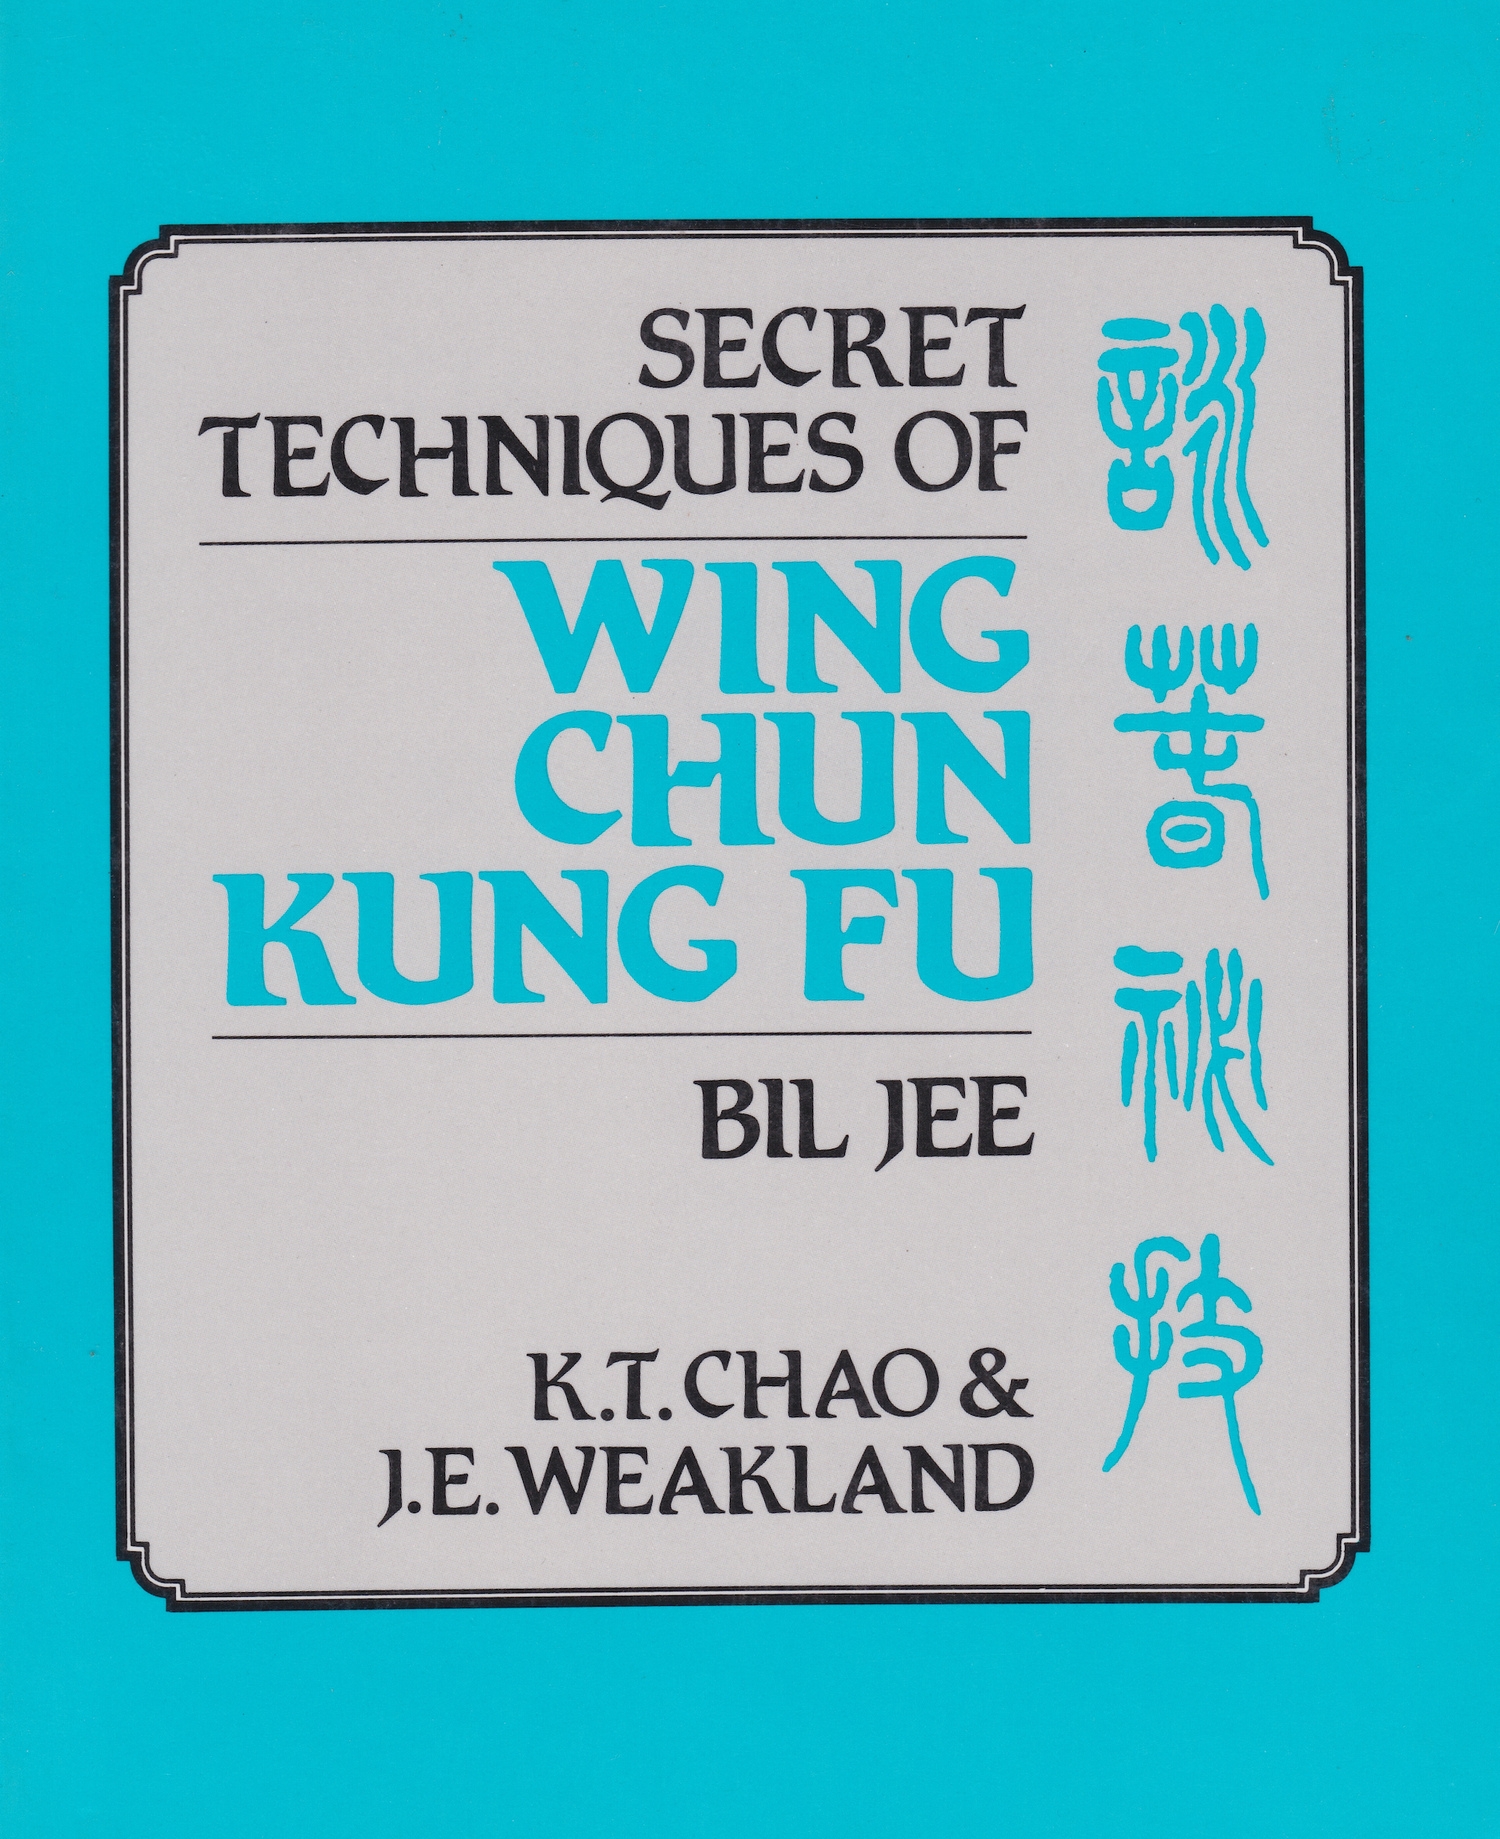 Secret Techniques of Wing Chun Kung Fu: Bil Jee Book by KT Chao & JE Weakland (Preowned)